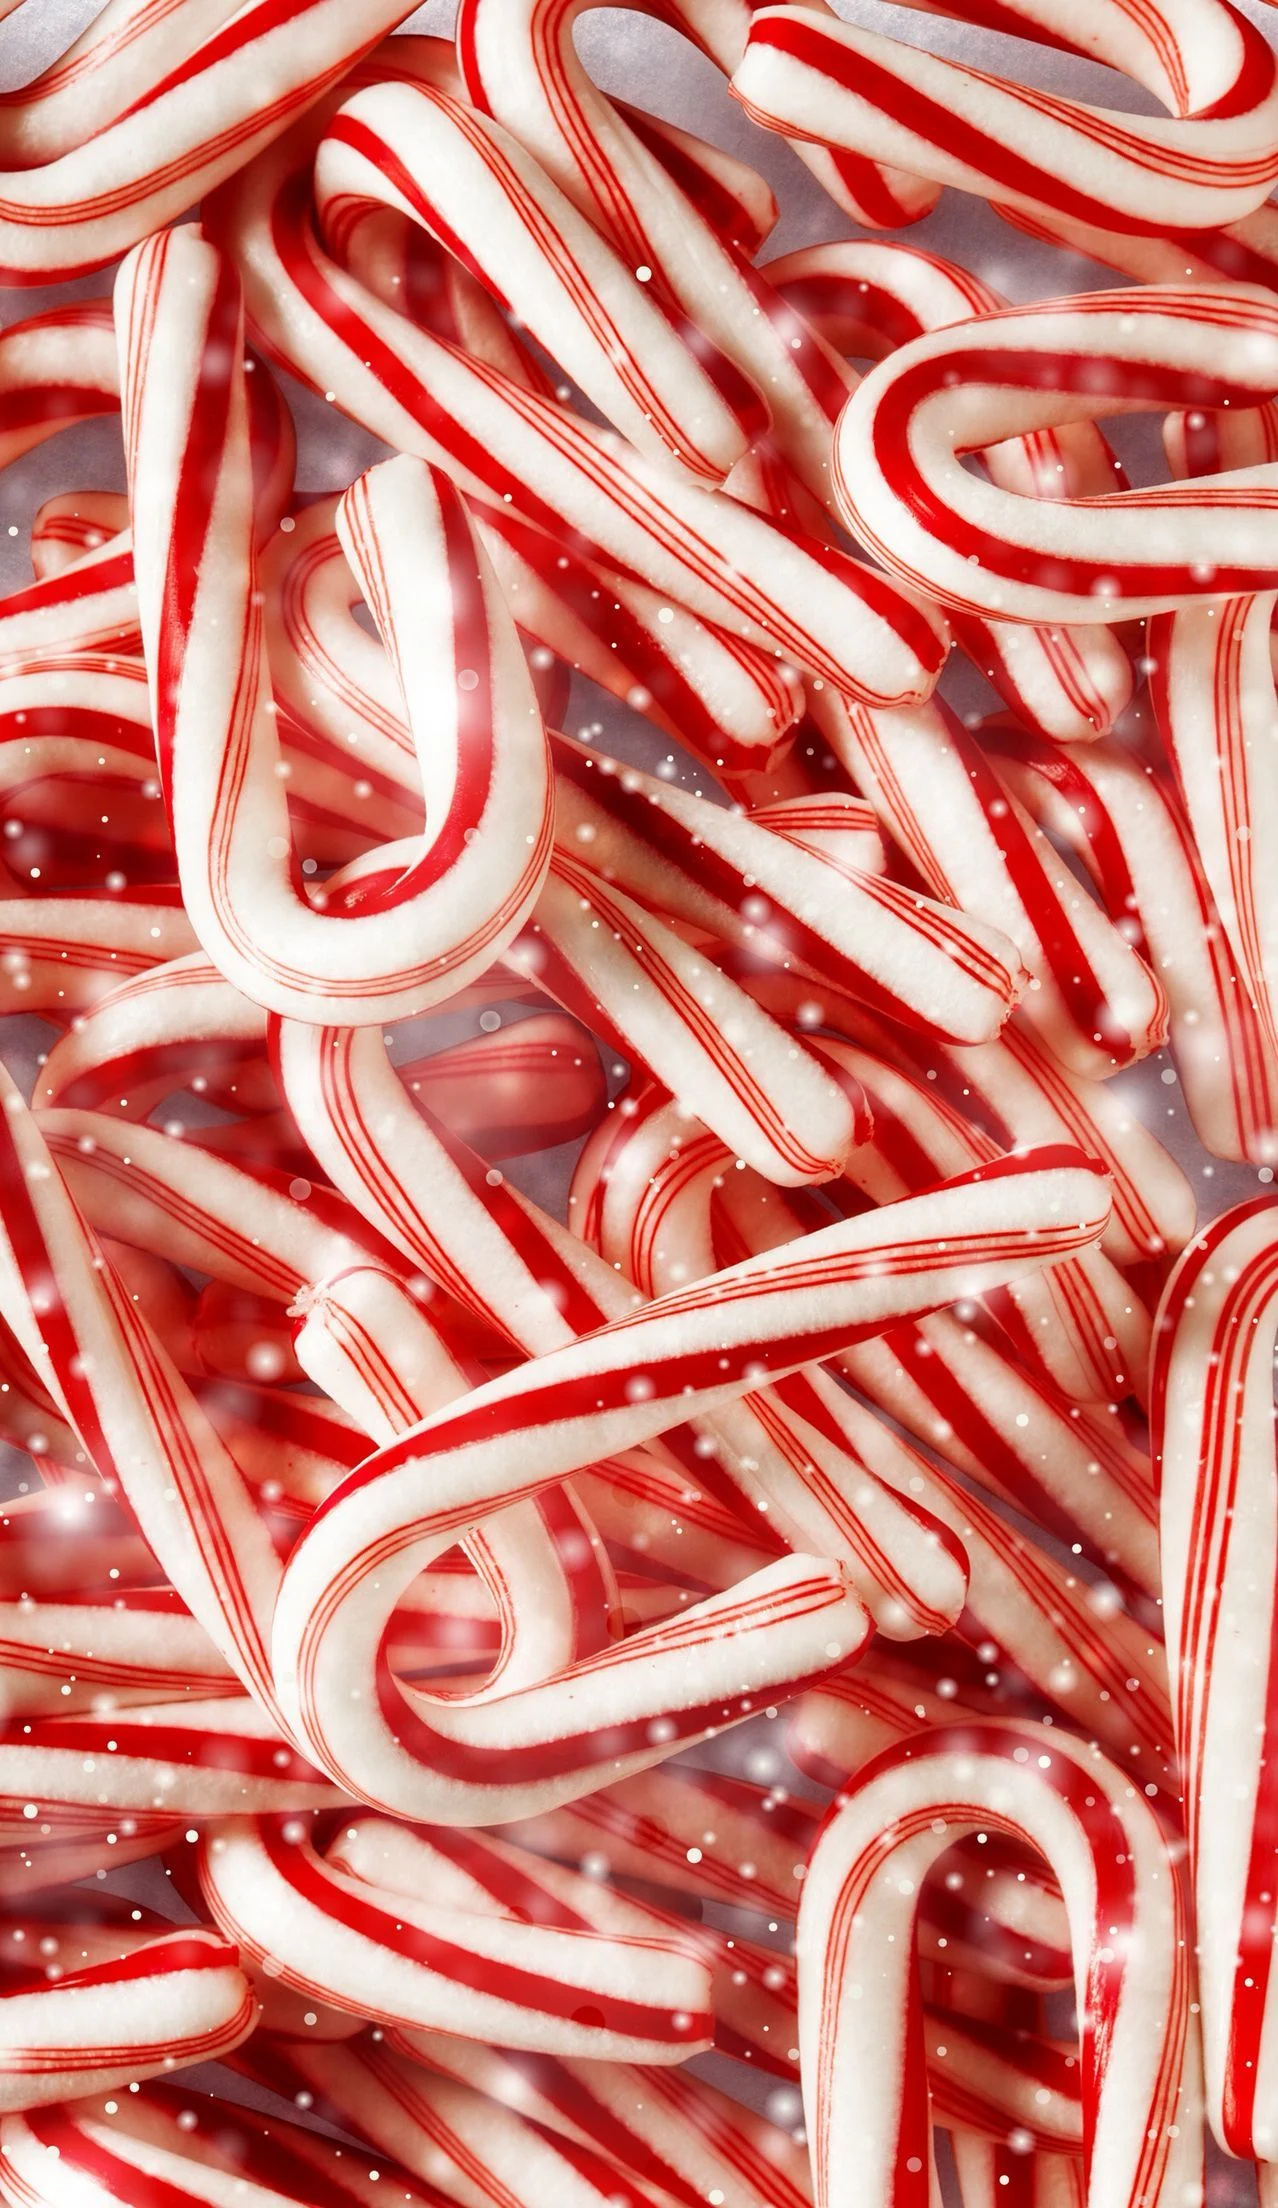 Candy canes iPhone wallpapers, Festive holiday sweets, Sweet treats on your screen, Christmas candy joy, 1280x2210 HD Handy